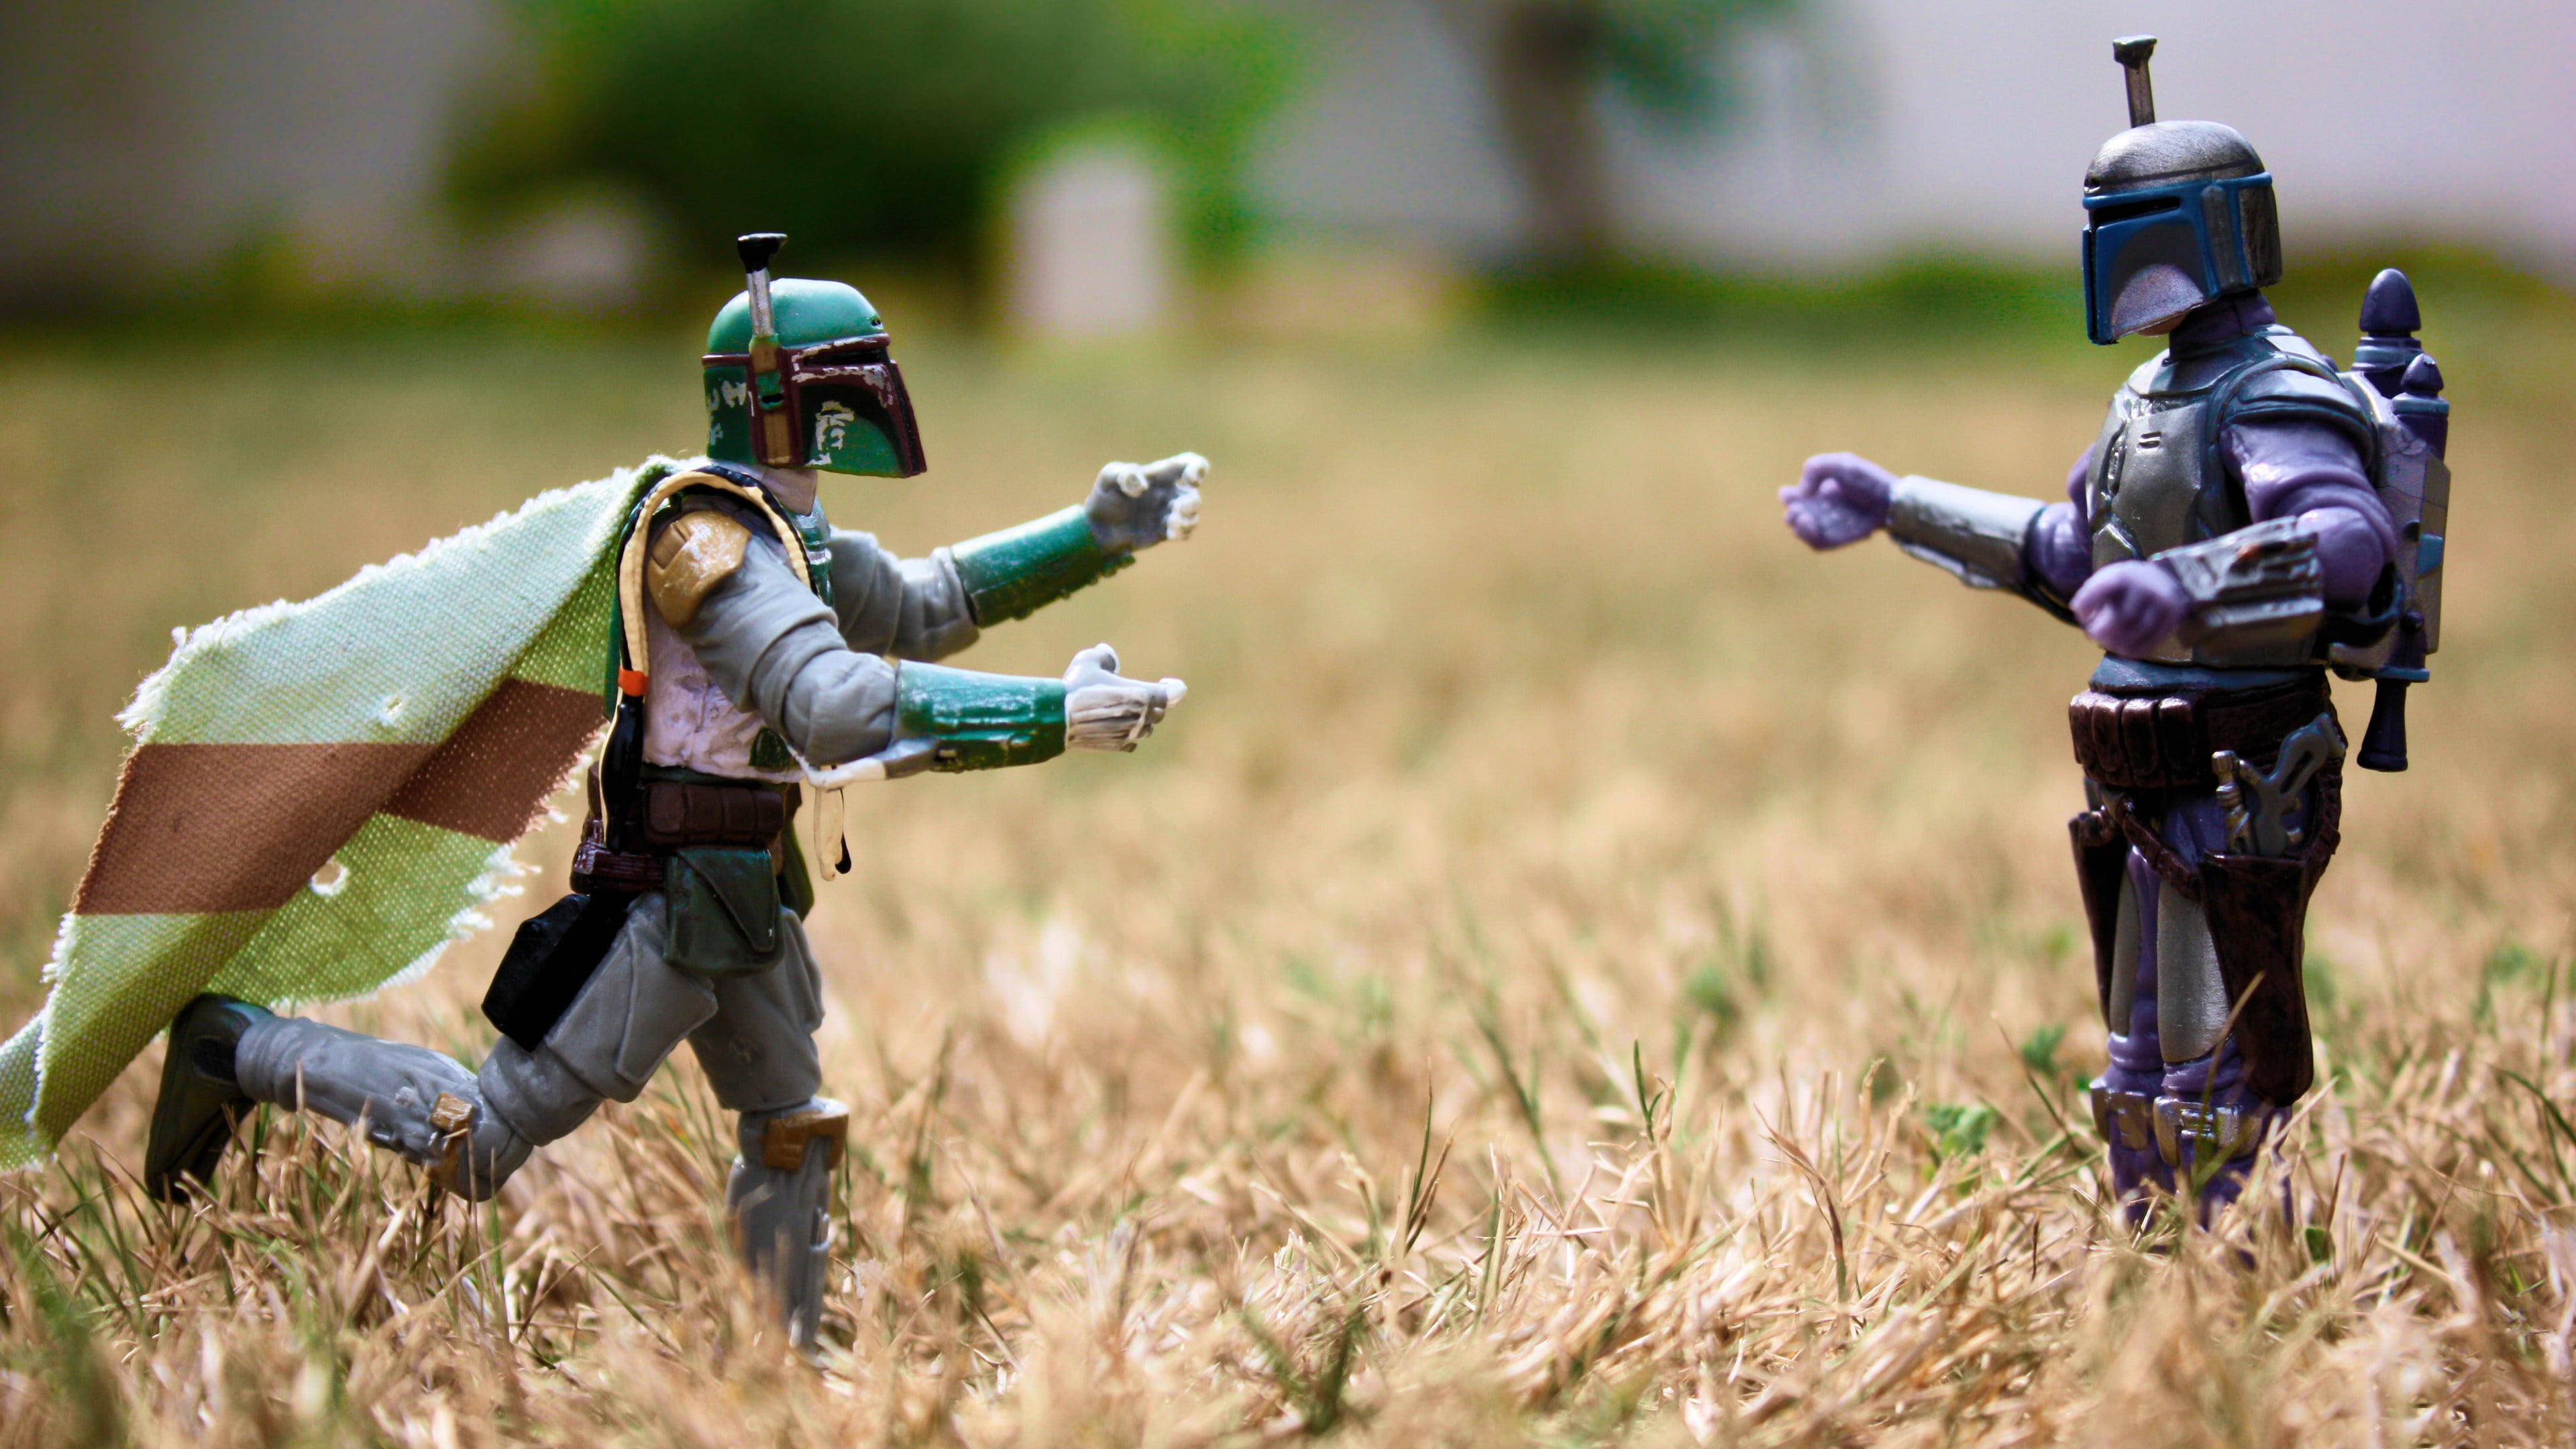 two green and gray Star Wars Clonetrooper action figures on beige grass